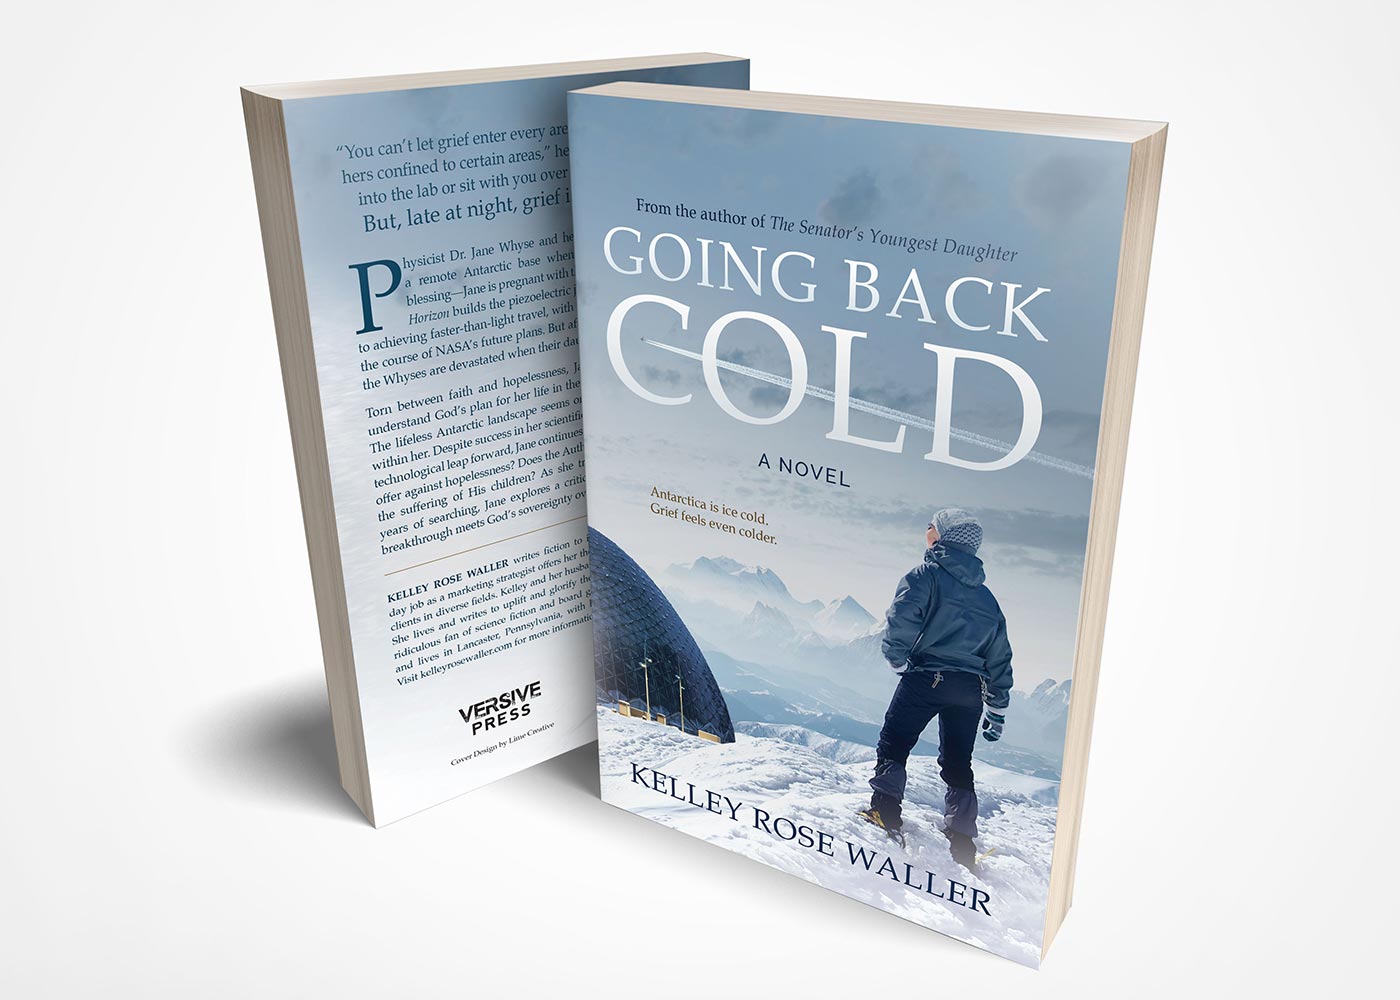 Going Back Cold By Kelley Rose Waller